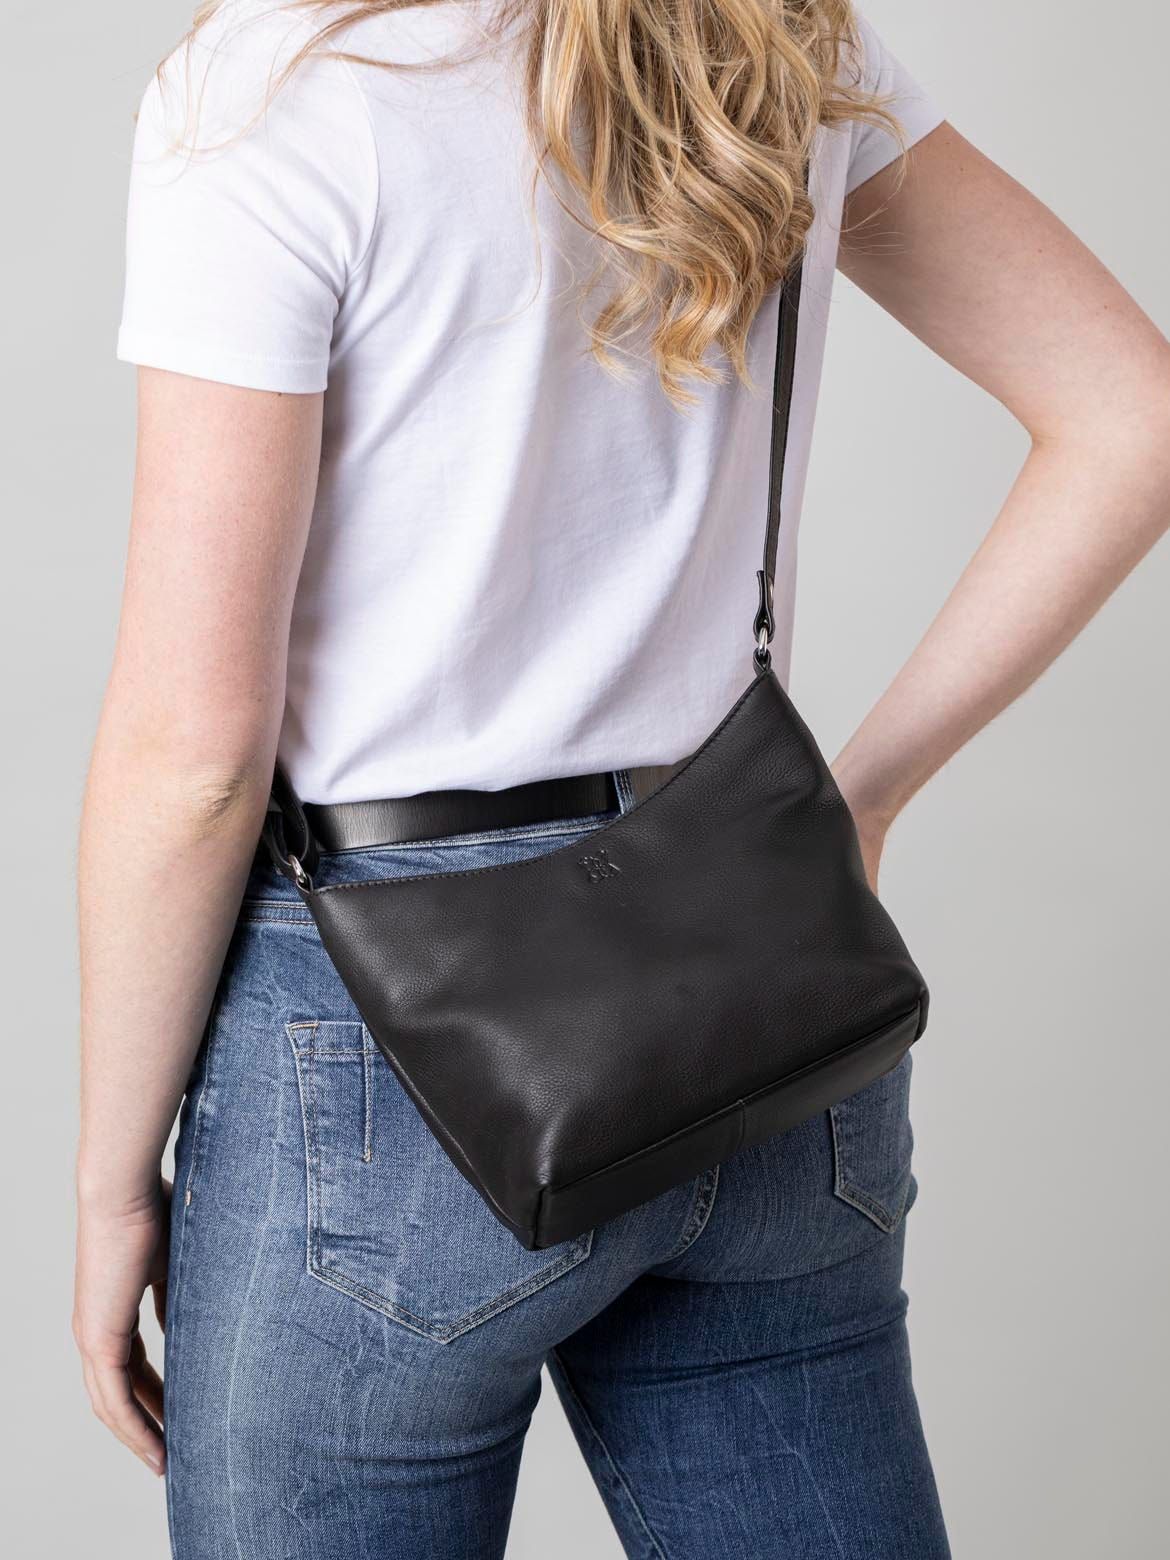 The Fornside is the perfect black cross body bag, crafted from luxuriously soft leather, its minimalist design makes it easy to coordinate with any outfit. A small handbag, it works as a traditional cross body bag, yet the adjustable strap allows it to be carried as a compact shoulder bag, when the occasion requires. Not only does the Fornside handbag look great, it feels fantastic, thanks to our real leather that showcases the natural patina. And practicality is key... we've included a rear zip pocket, and the inside is carefully sectioned, with a zip-top main compartment in the middle, plus two additional sections secured with magnetic studs.